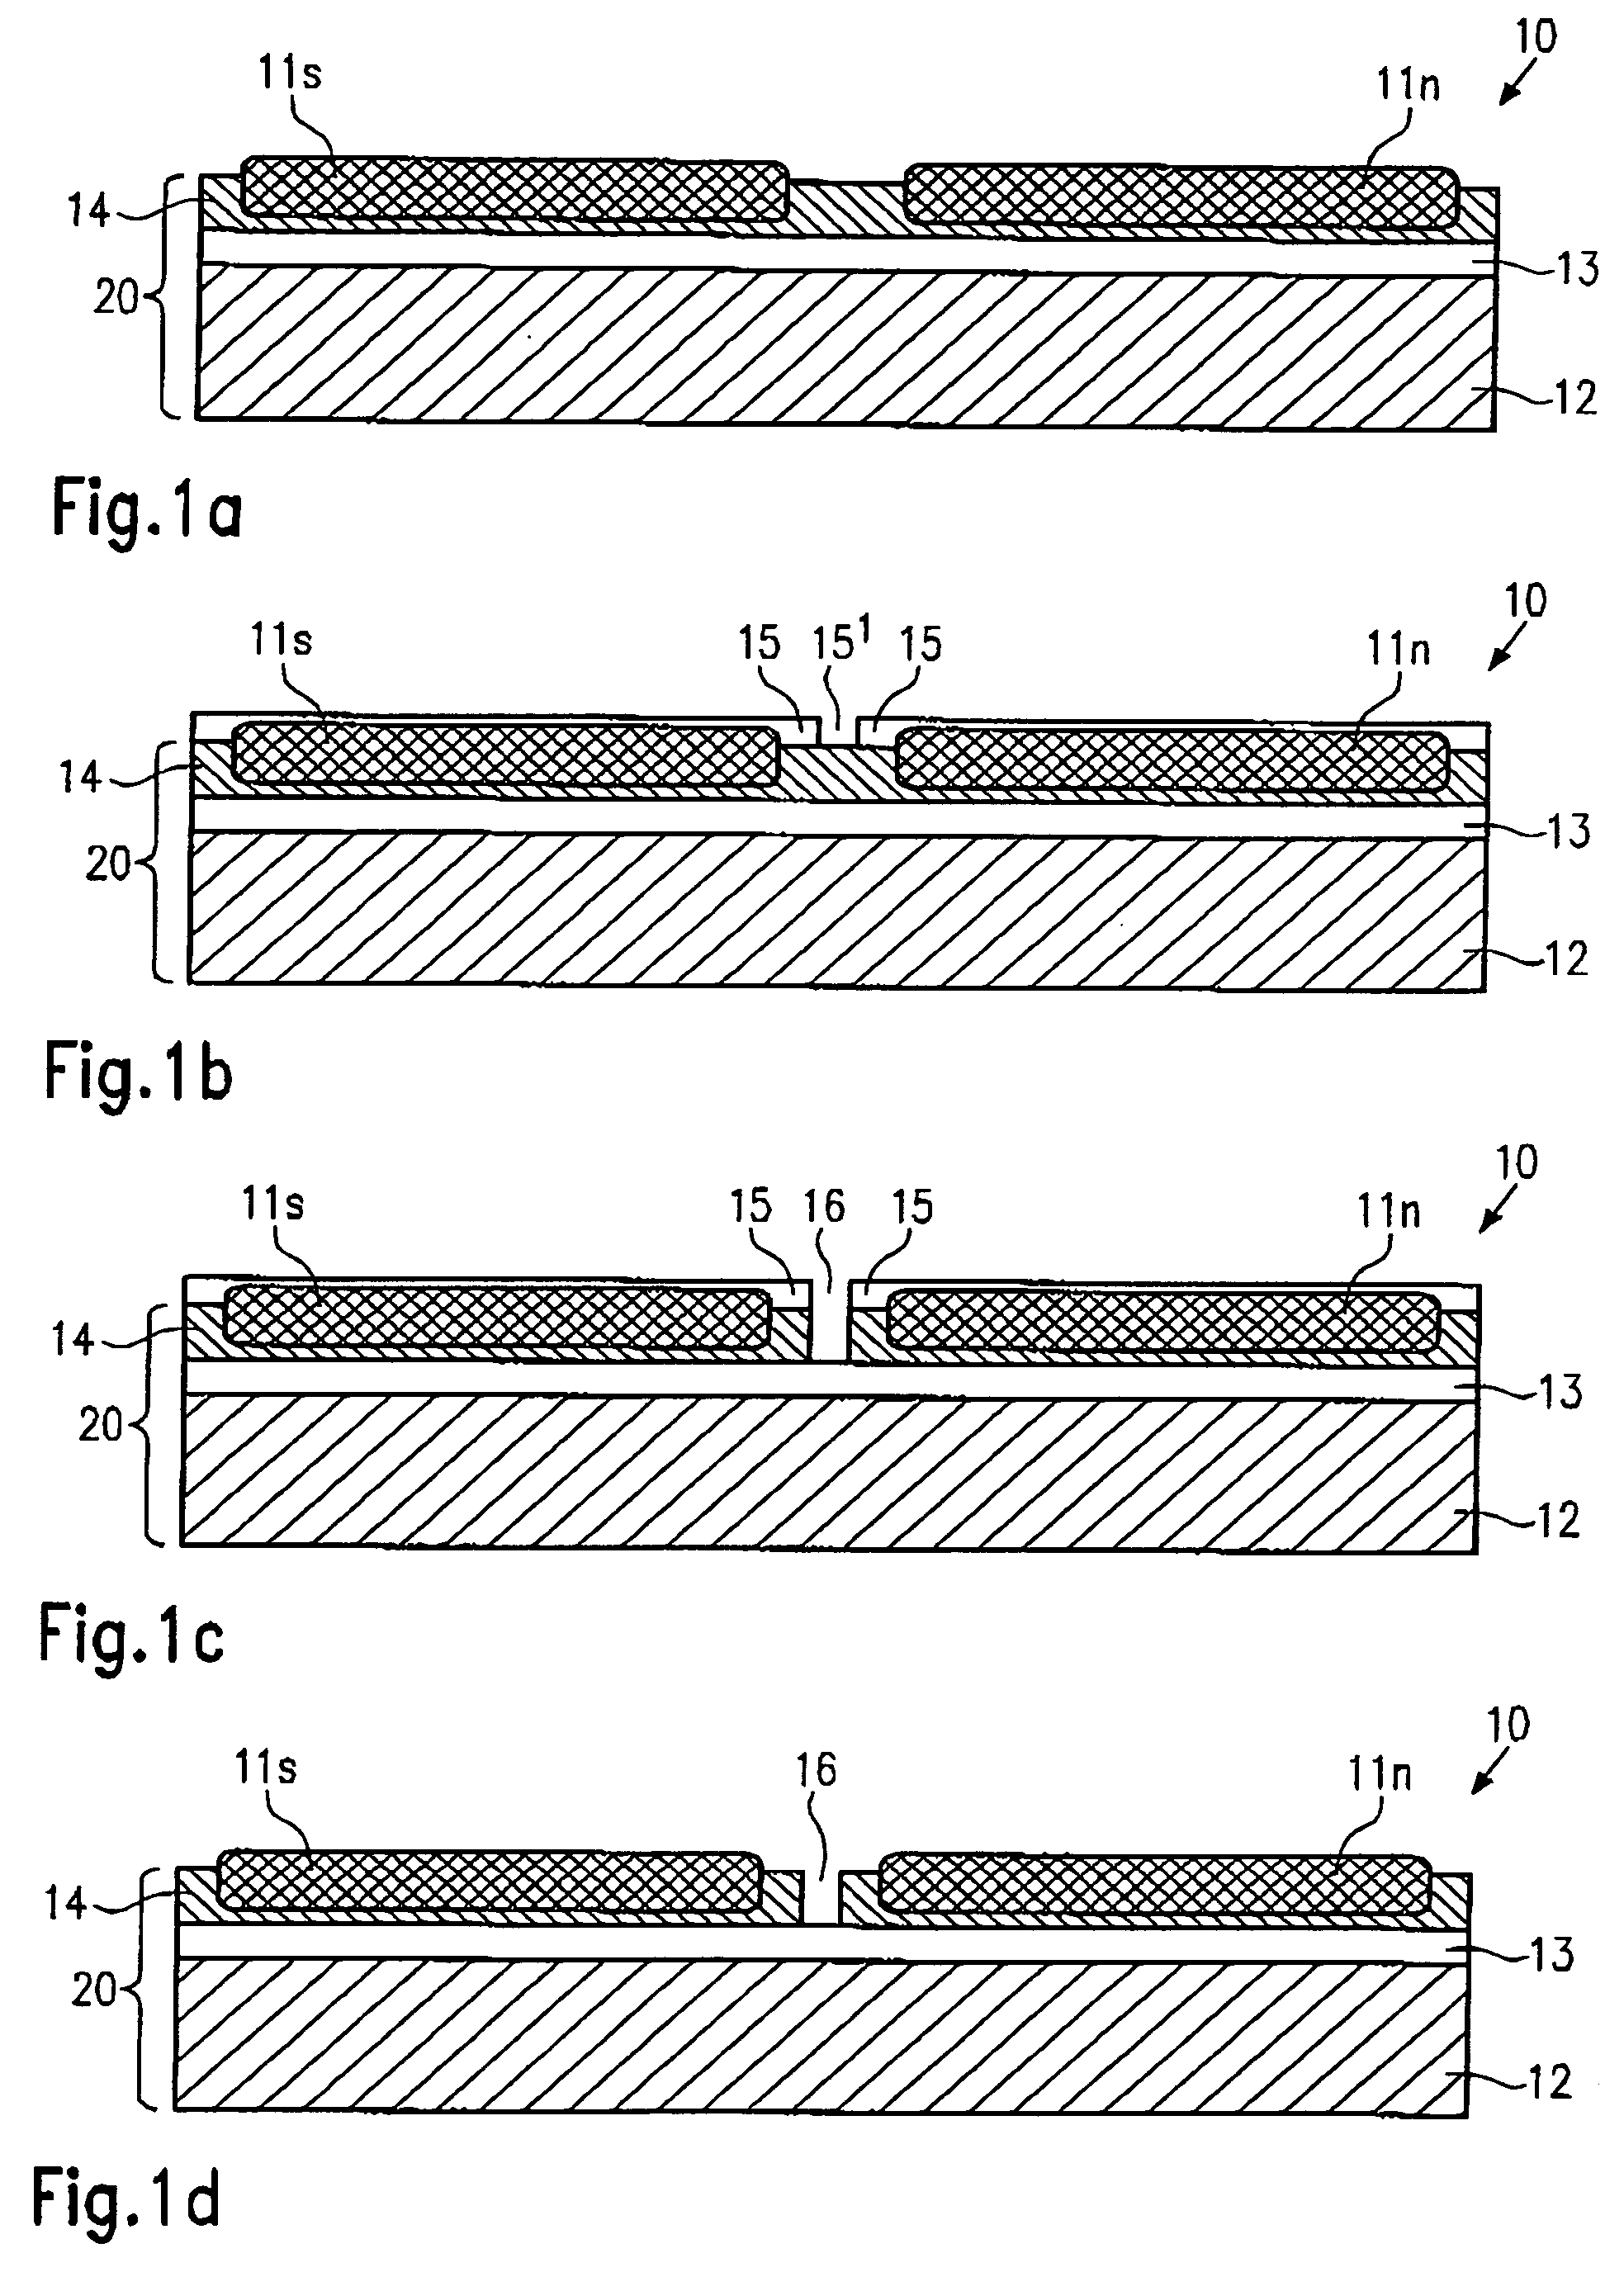 SOI circuit having reduced crosstalk interference and a method for forming the same